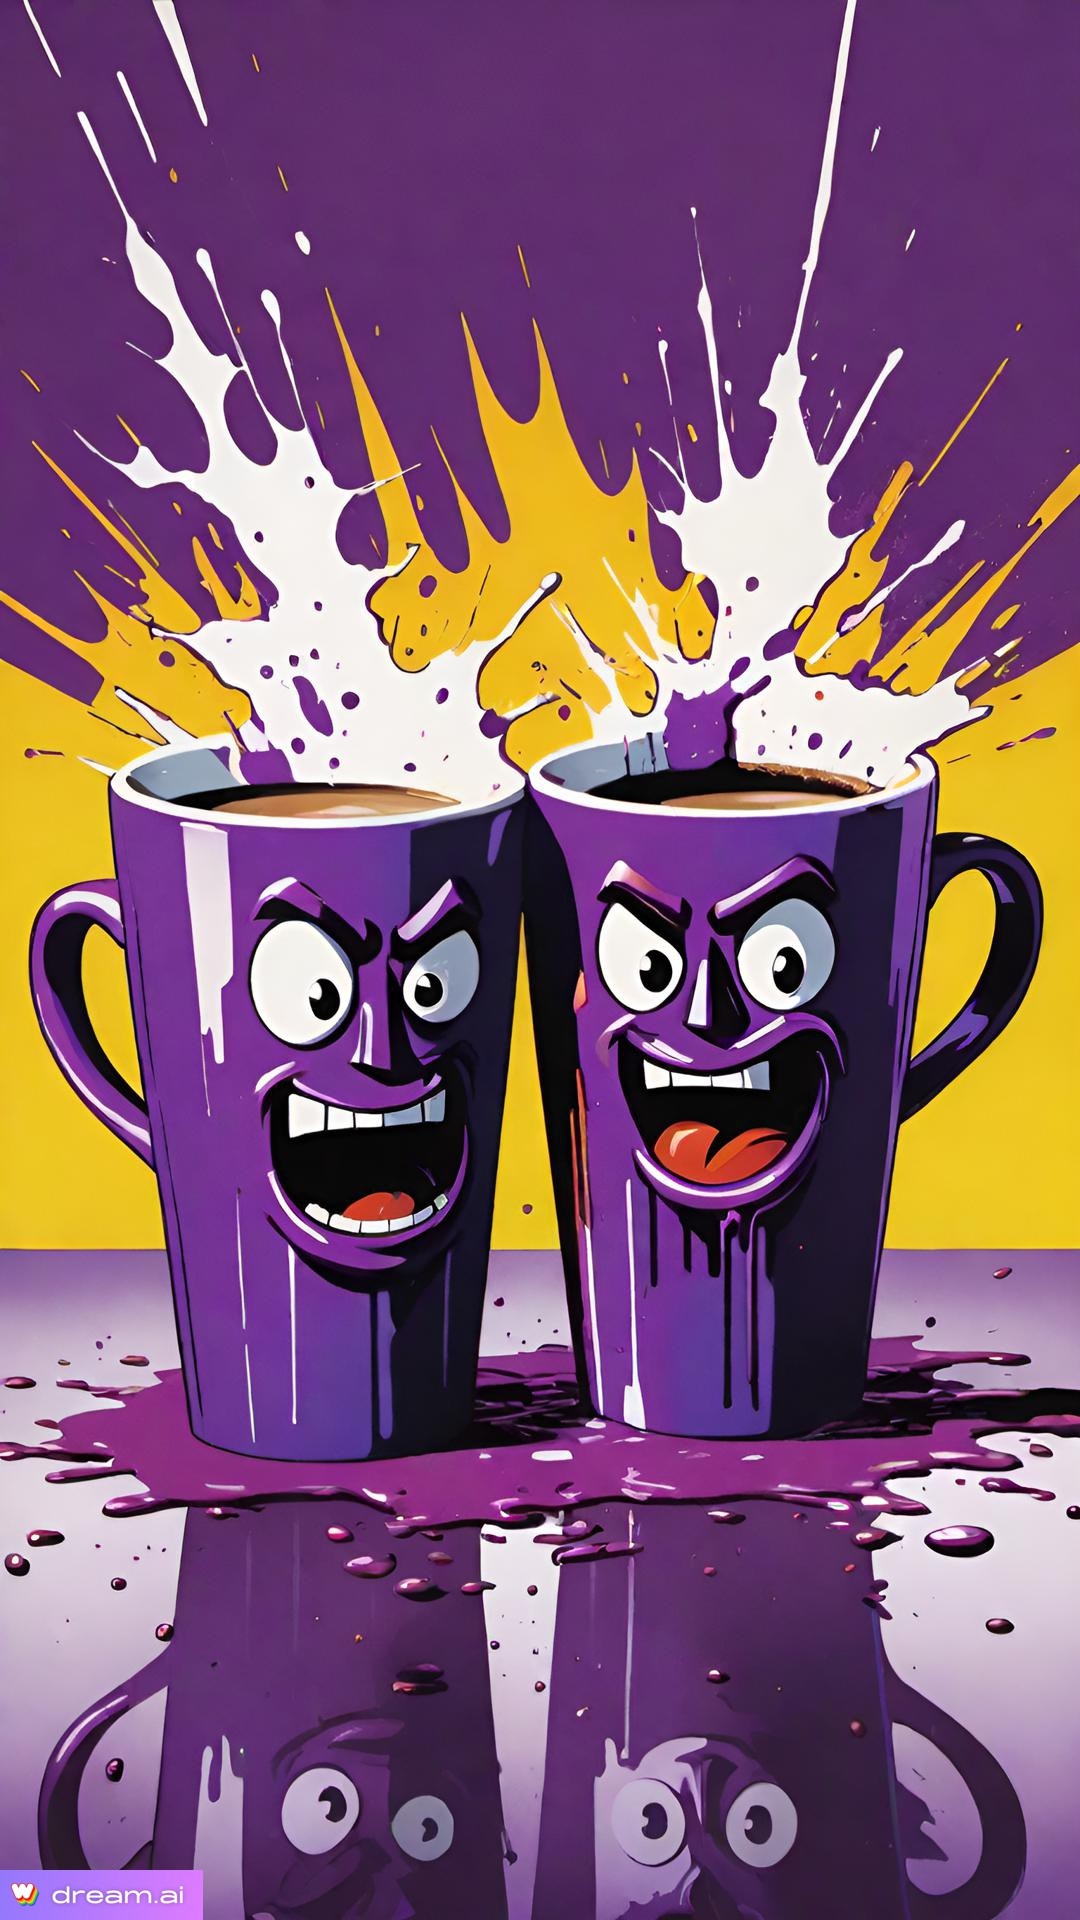 a purple mugs with faces and splashing out of them